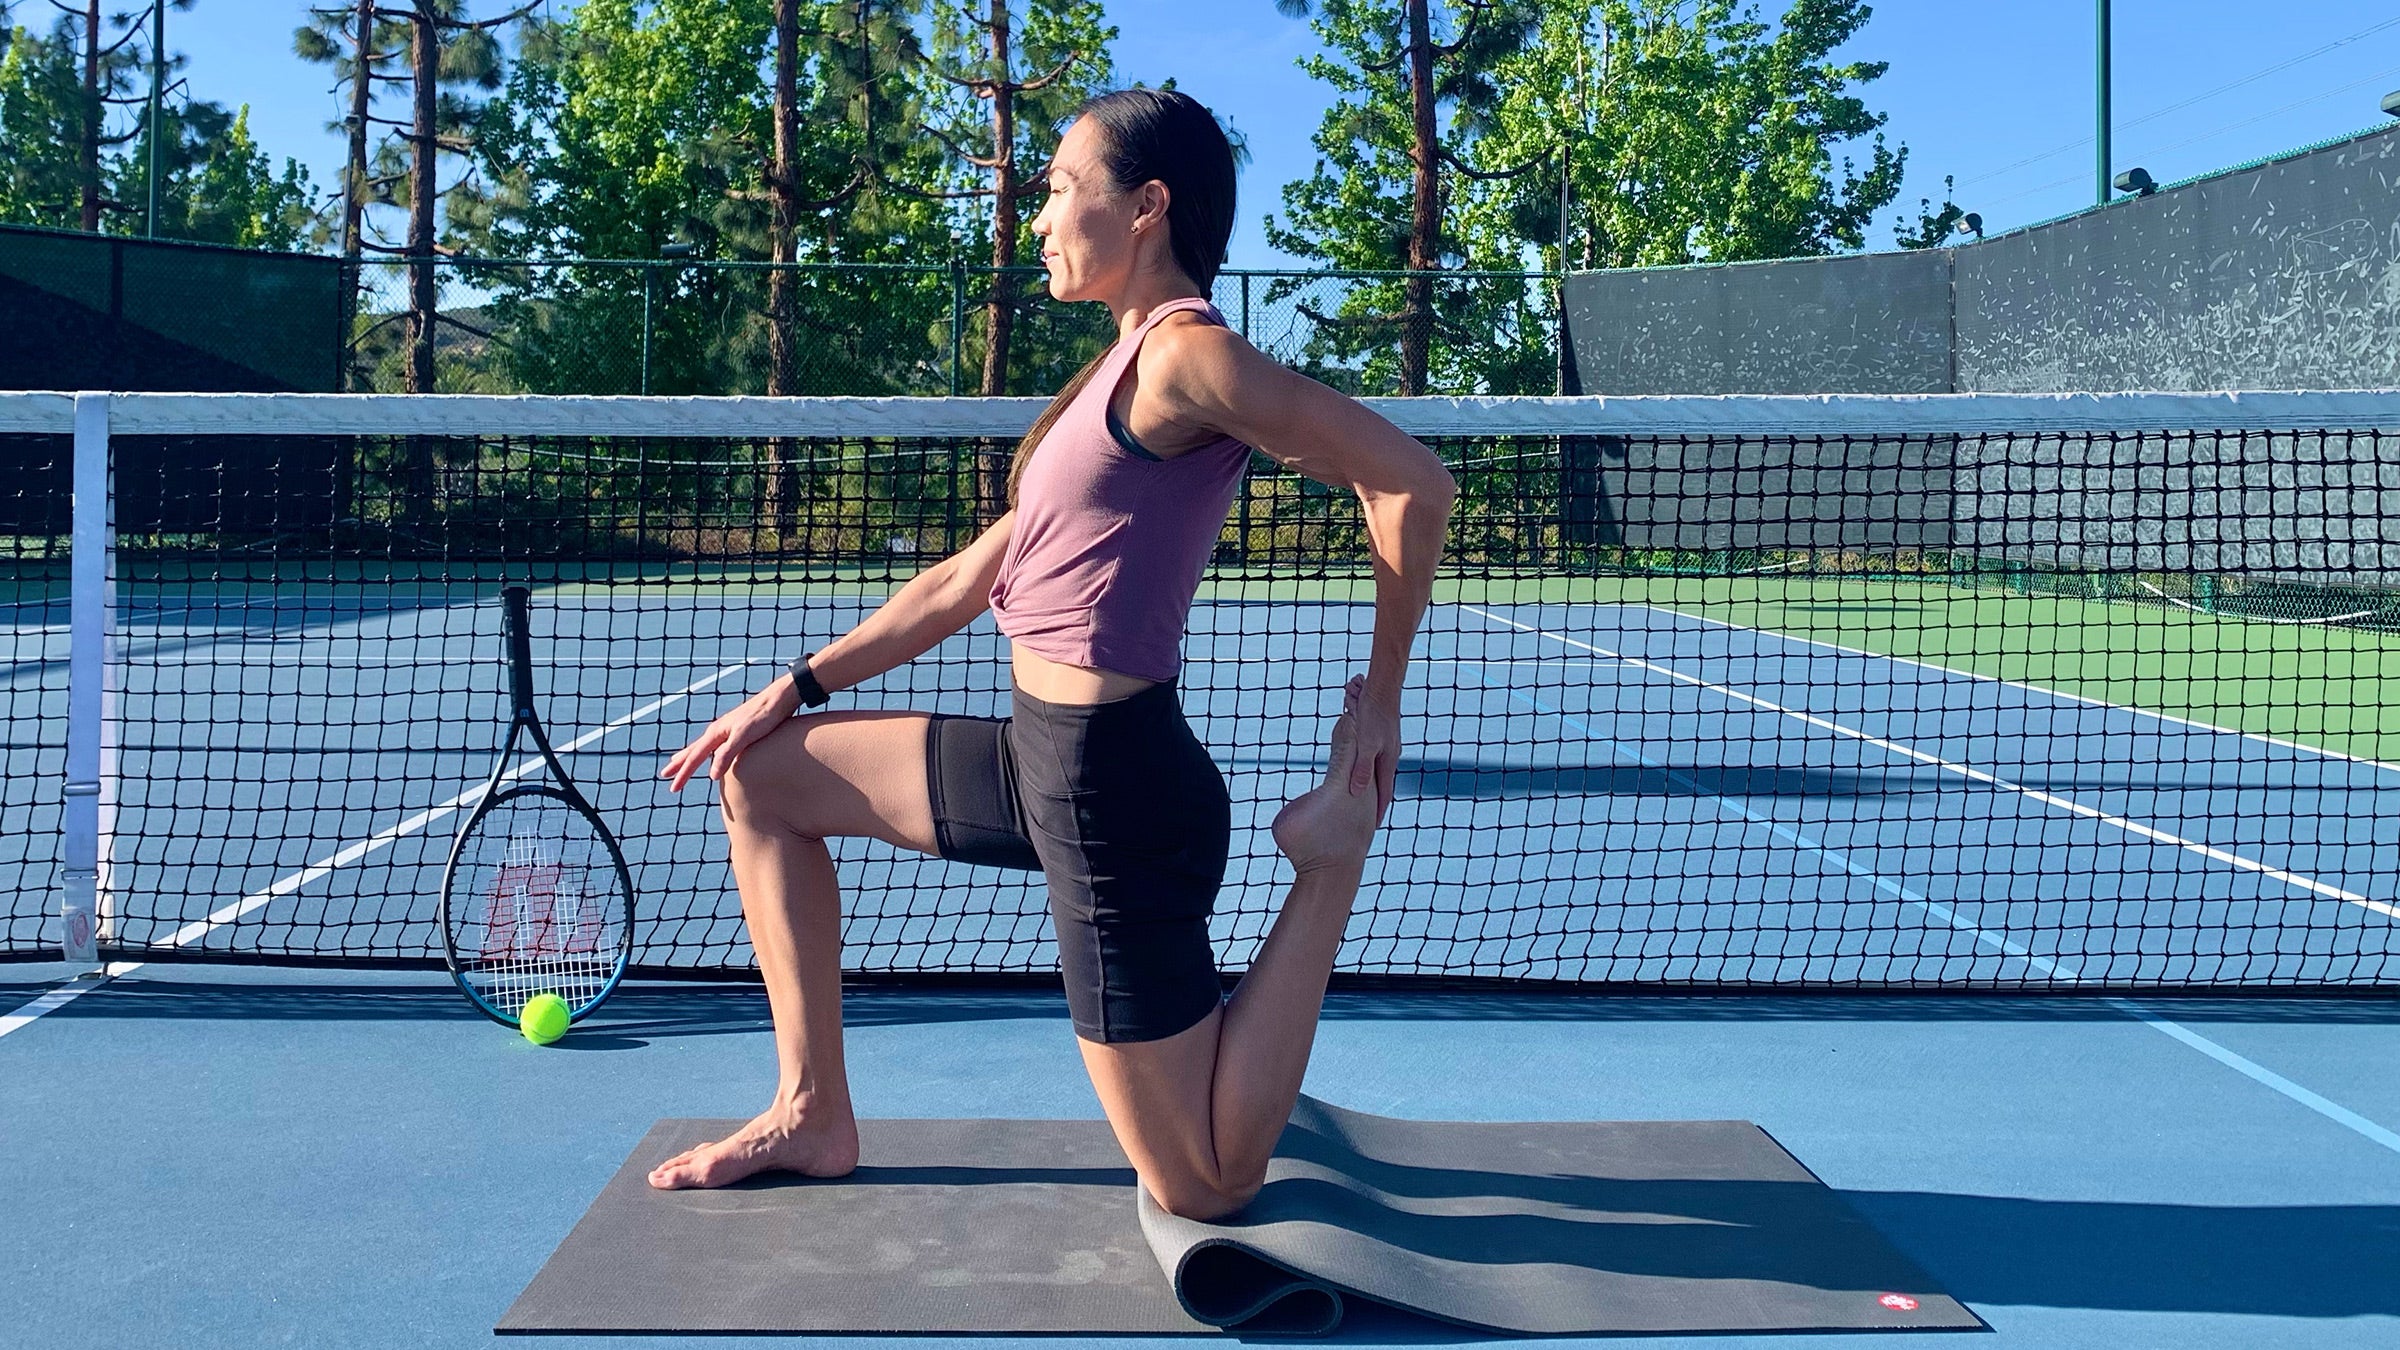 Yoga for Tennis: 8 Poses to Practice After You Play - Yoga Journal